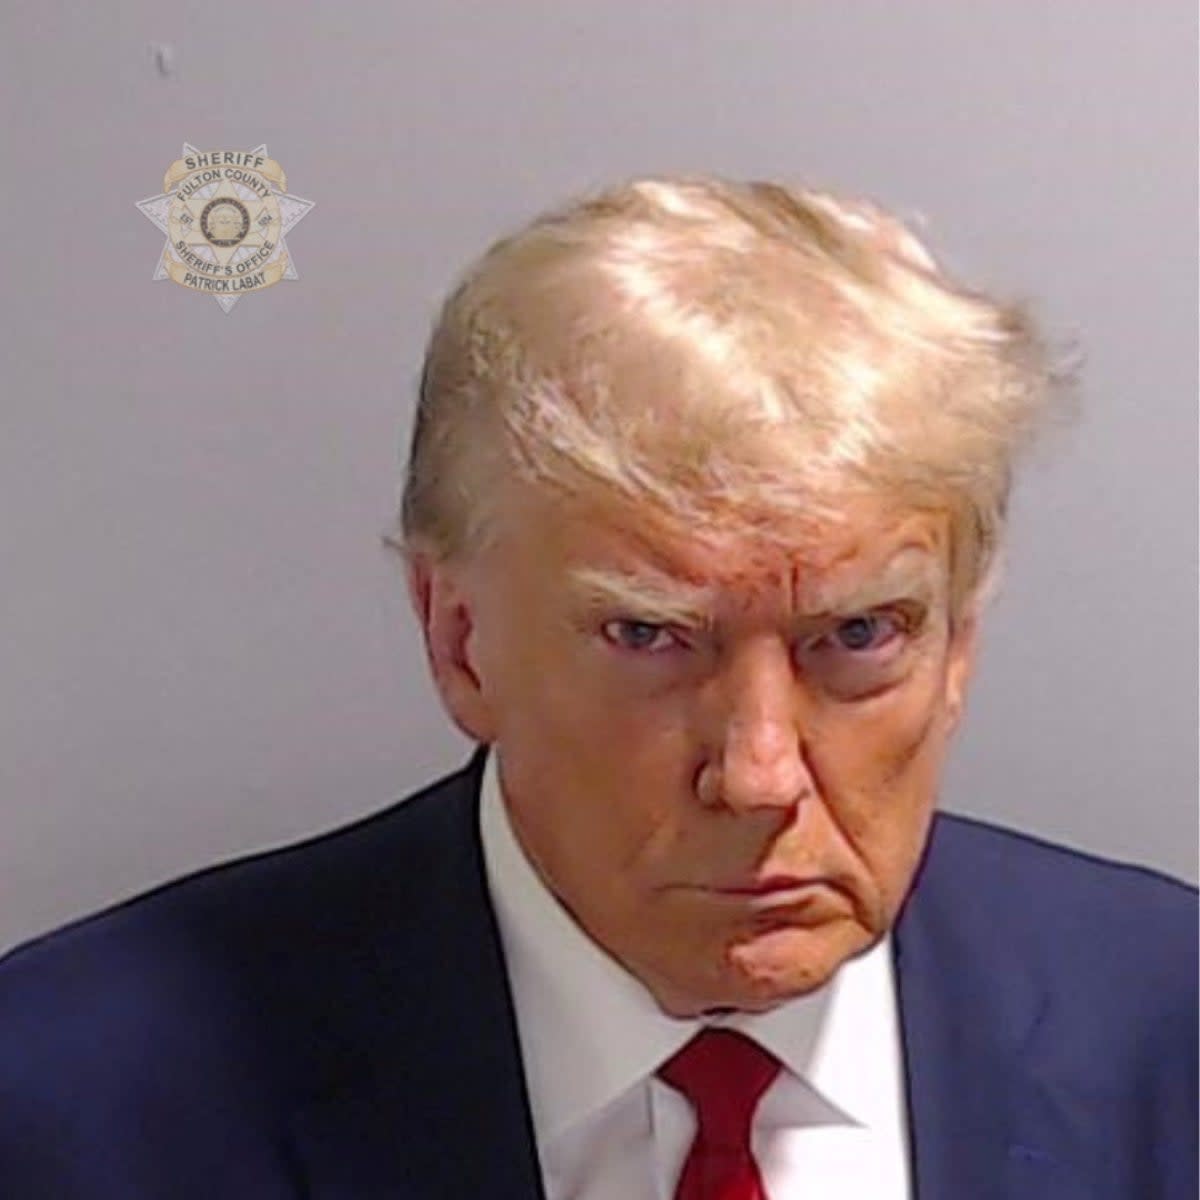 Former president Donald Trump is shown in a mug shot released by the Fulton County Sheriff’s Office (via REUTERS)